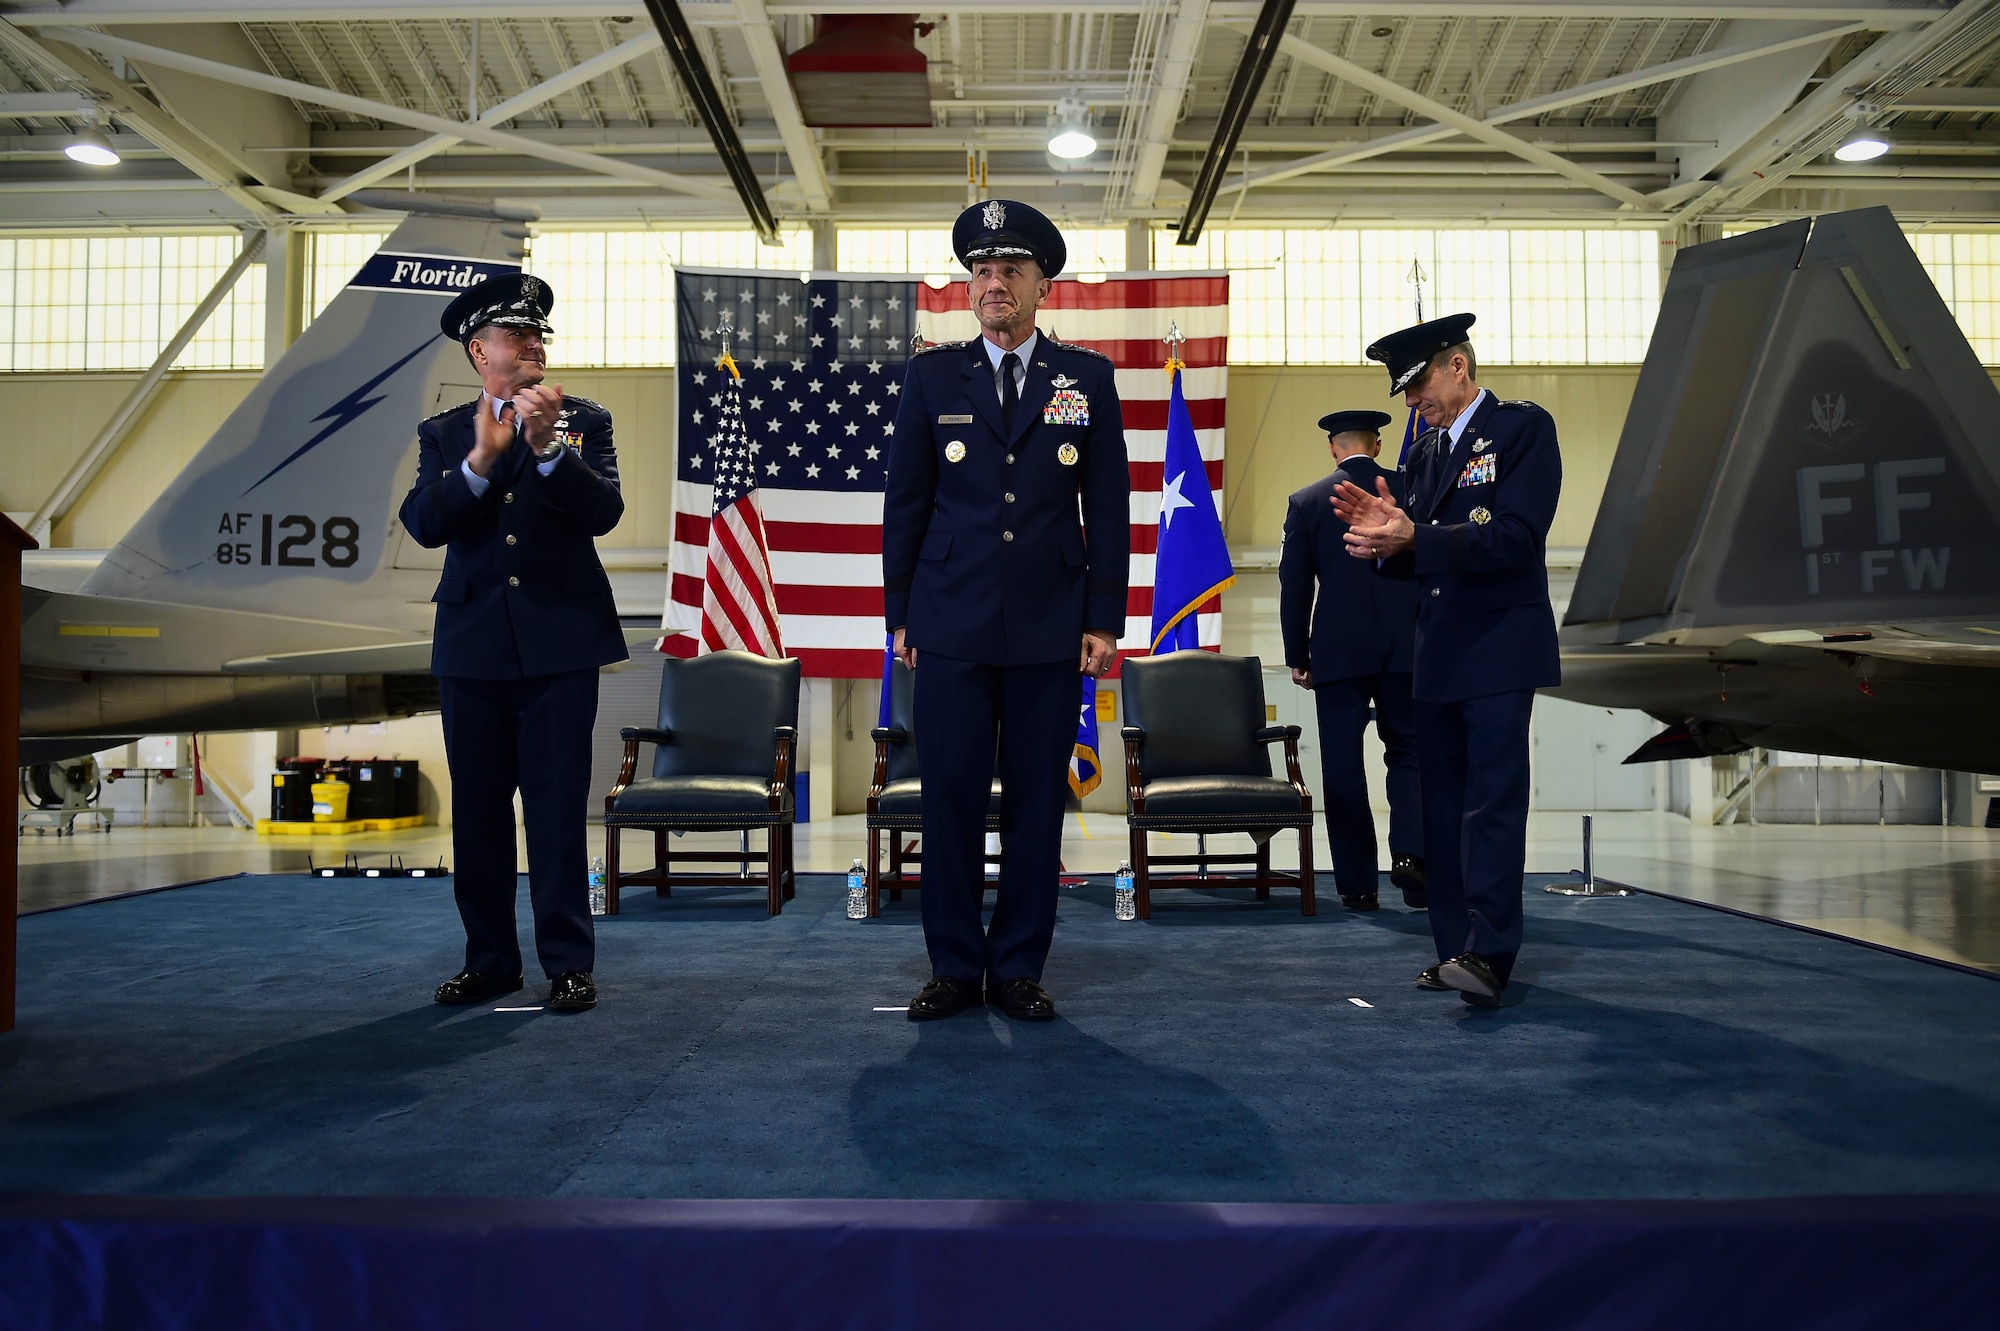 U.S. Air Force Chief of Staff Gen. David L. Goldfein, and General Hawk Carlisle, former commander, Air Combat Command, lead an applause for Gen. James M. Holmes, Commander, ACC, during ACC’s Change of Command ceremony at Joint Base Langley-Eustis, Va., March 10, 2017. Holmes assumed command from Carlisle, who retired after 39 years of service to the Air Force. (U.S. Air Force photo by Senior Airman Kimberly Nagle) 